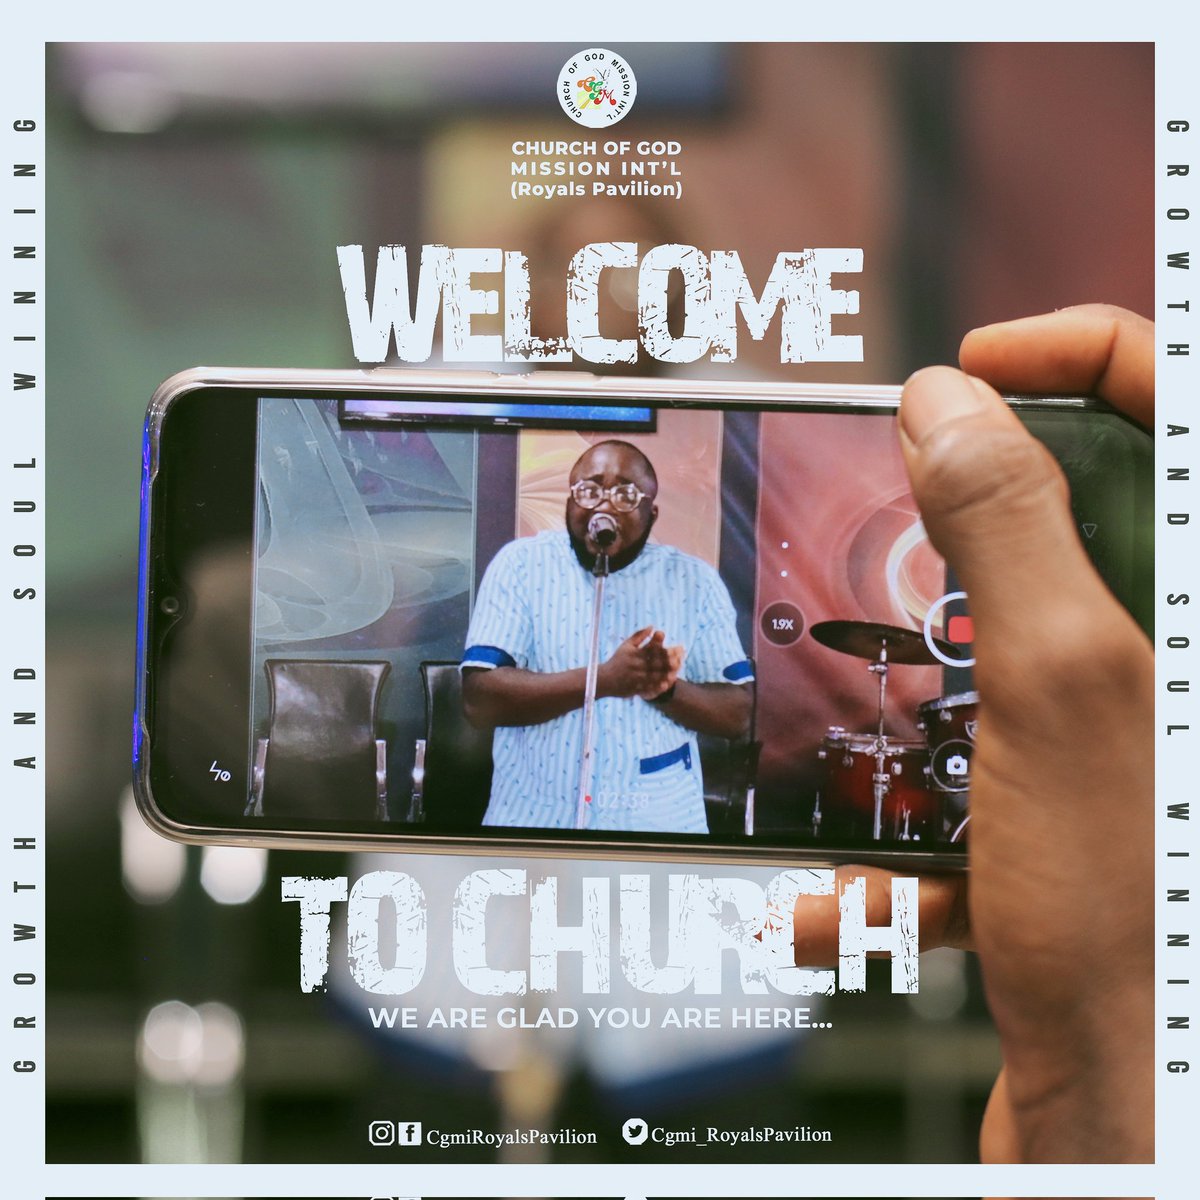 You are special to God, special to us and a blessing to your world.

Welcome to Church! We are glad you are here.

#welcome #capsunday #chosenandproductive #divineassistance #direction #benefitsofthecross #focusonchrist #cgmiroyalspavilion #cgmirp #explorepage